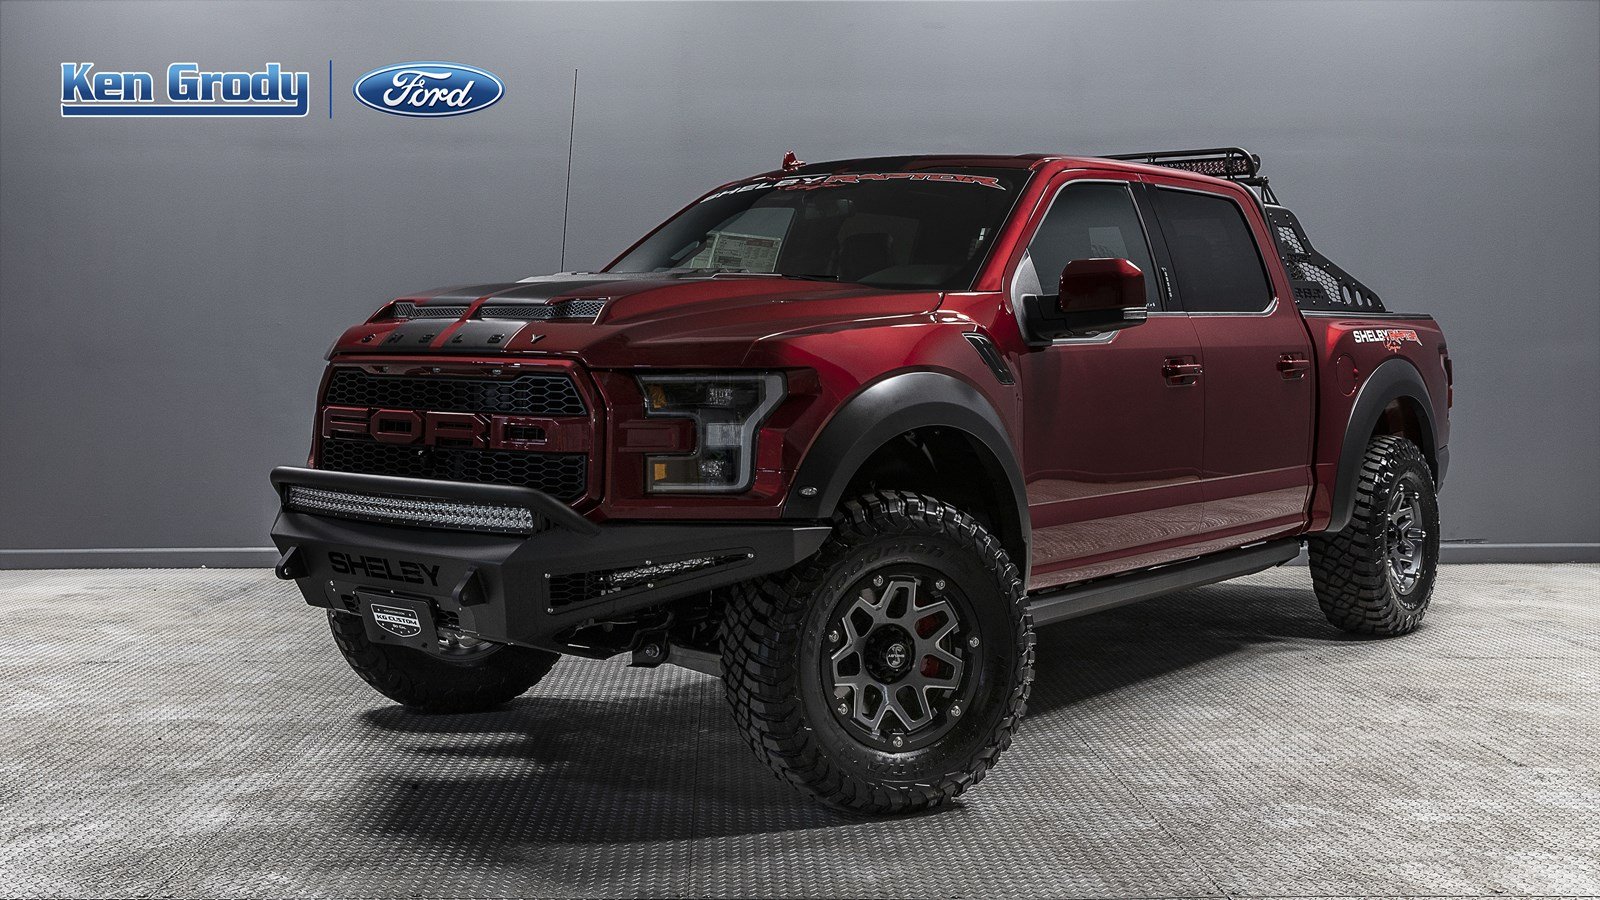 New 2019 Ford F-150 Raptor Shelby Baja Crew Cab Pickup in Buena Park.